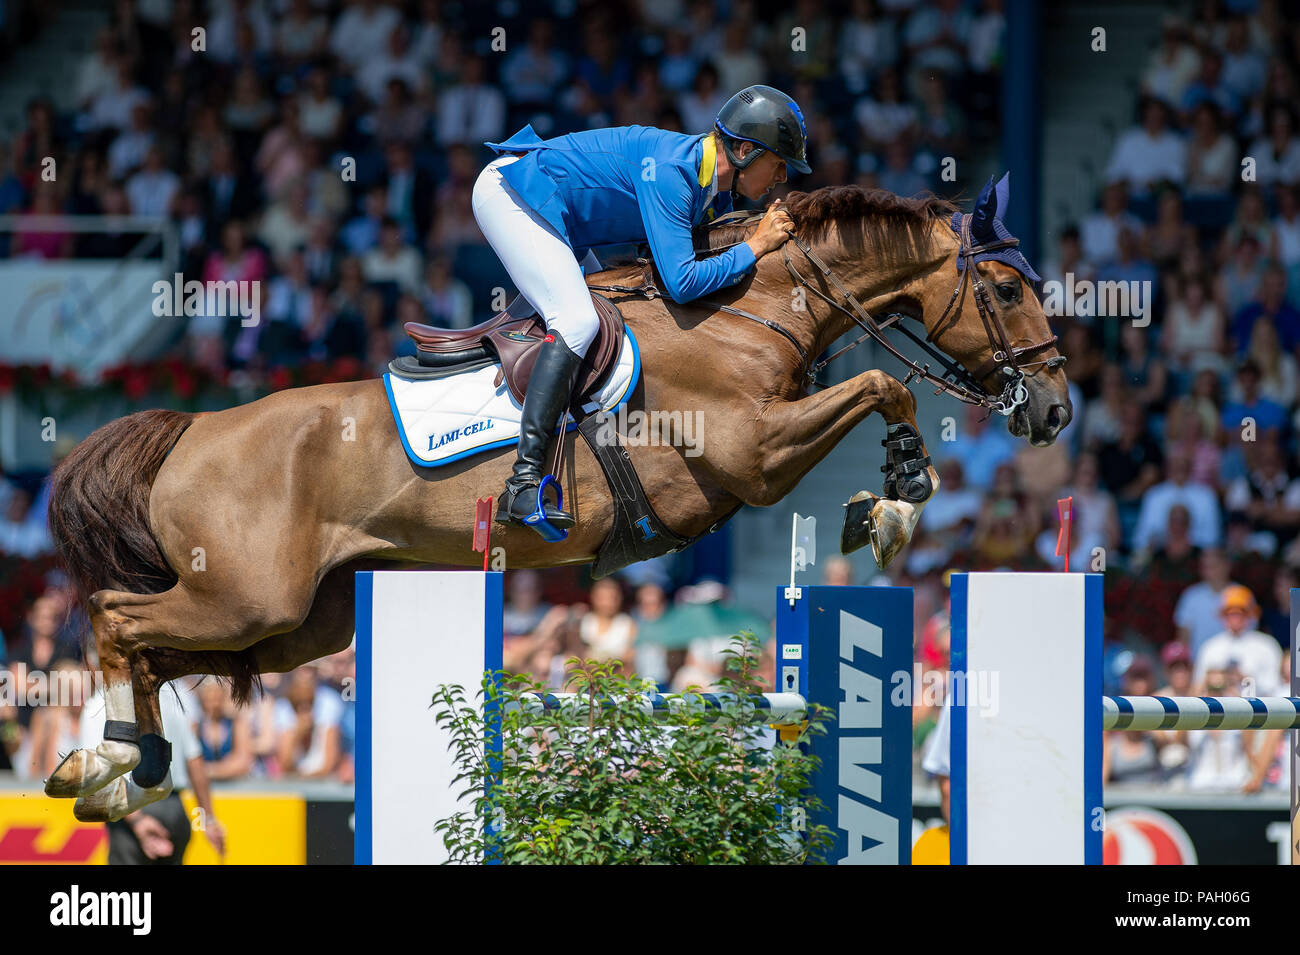 Aachen, Germany. July 22, 2018 - Christian AHLMANN (GER) riding Tokyo  during the Rolex Grand Prix - CHIO Aachen 2018. Aachen, Germany, July 22th  2018. (Credit Image: © AFP7 via ZUMA Wire Stock Photo - Alamy